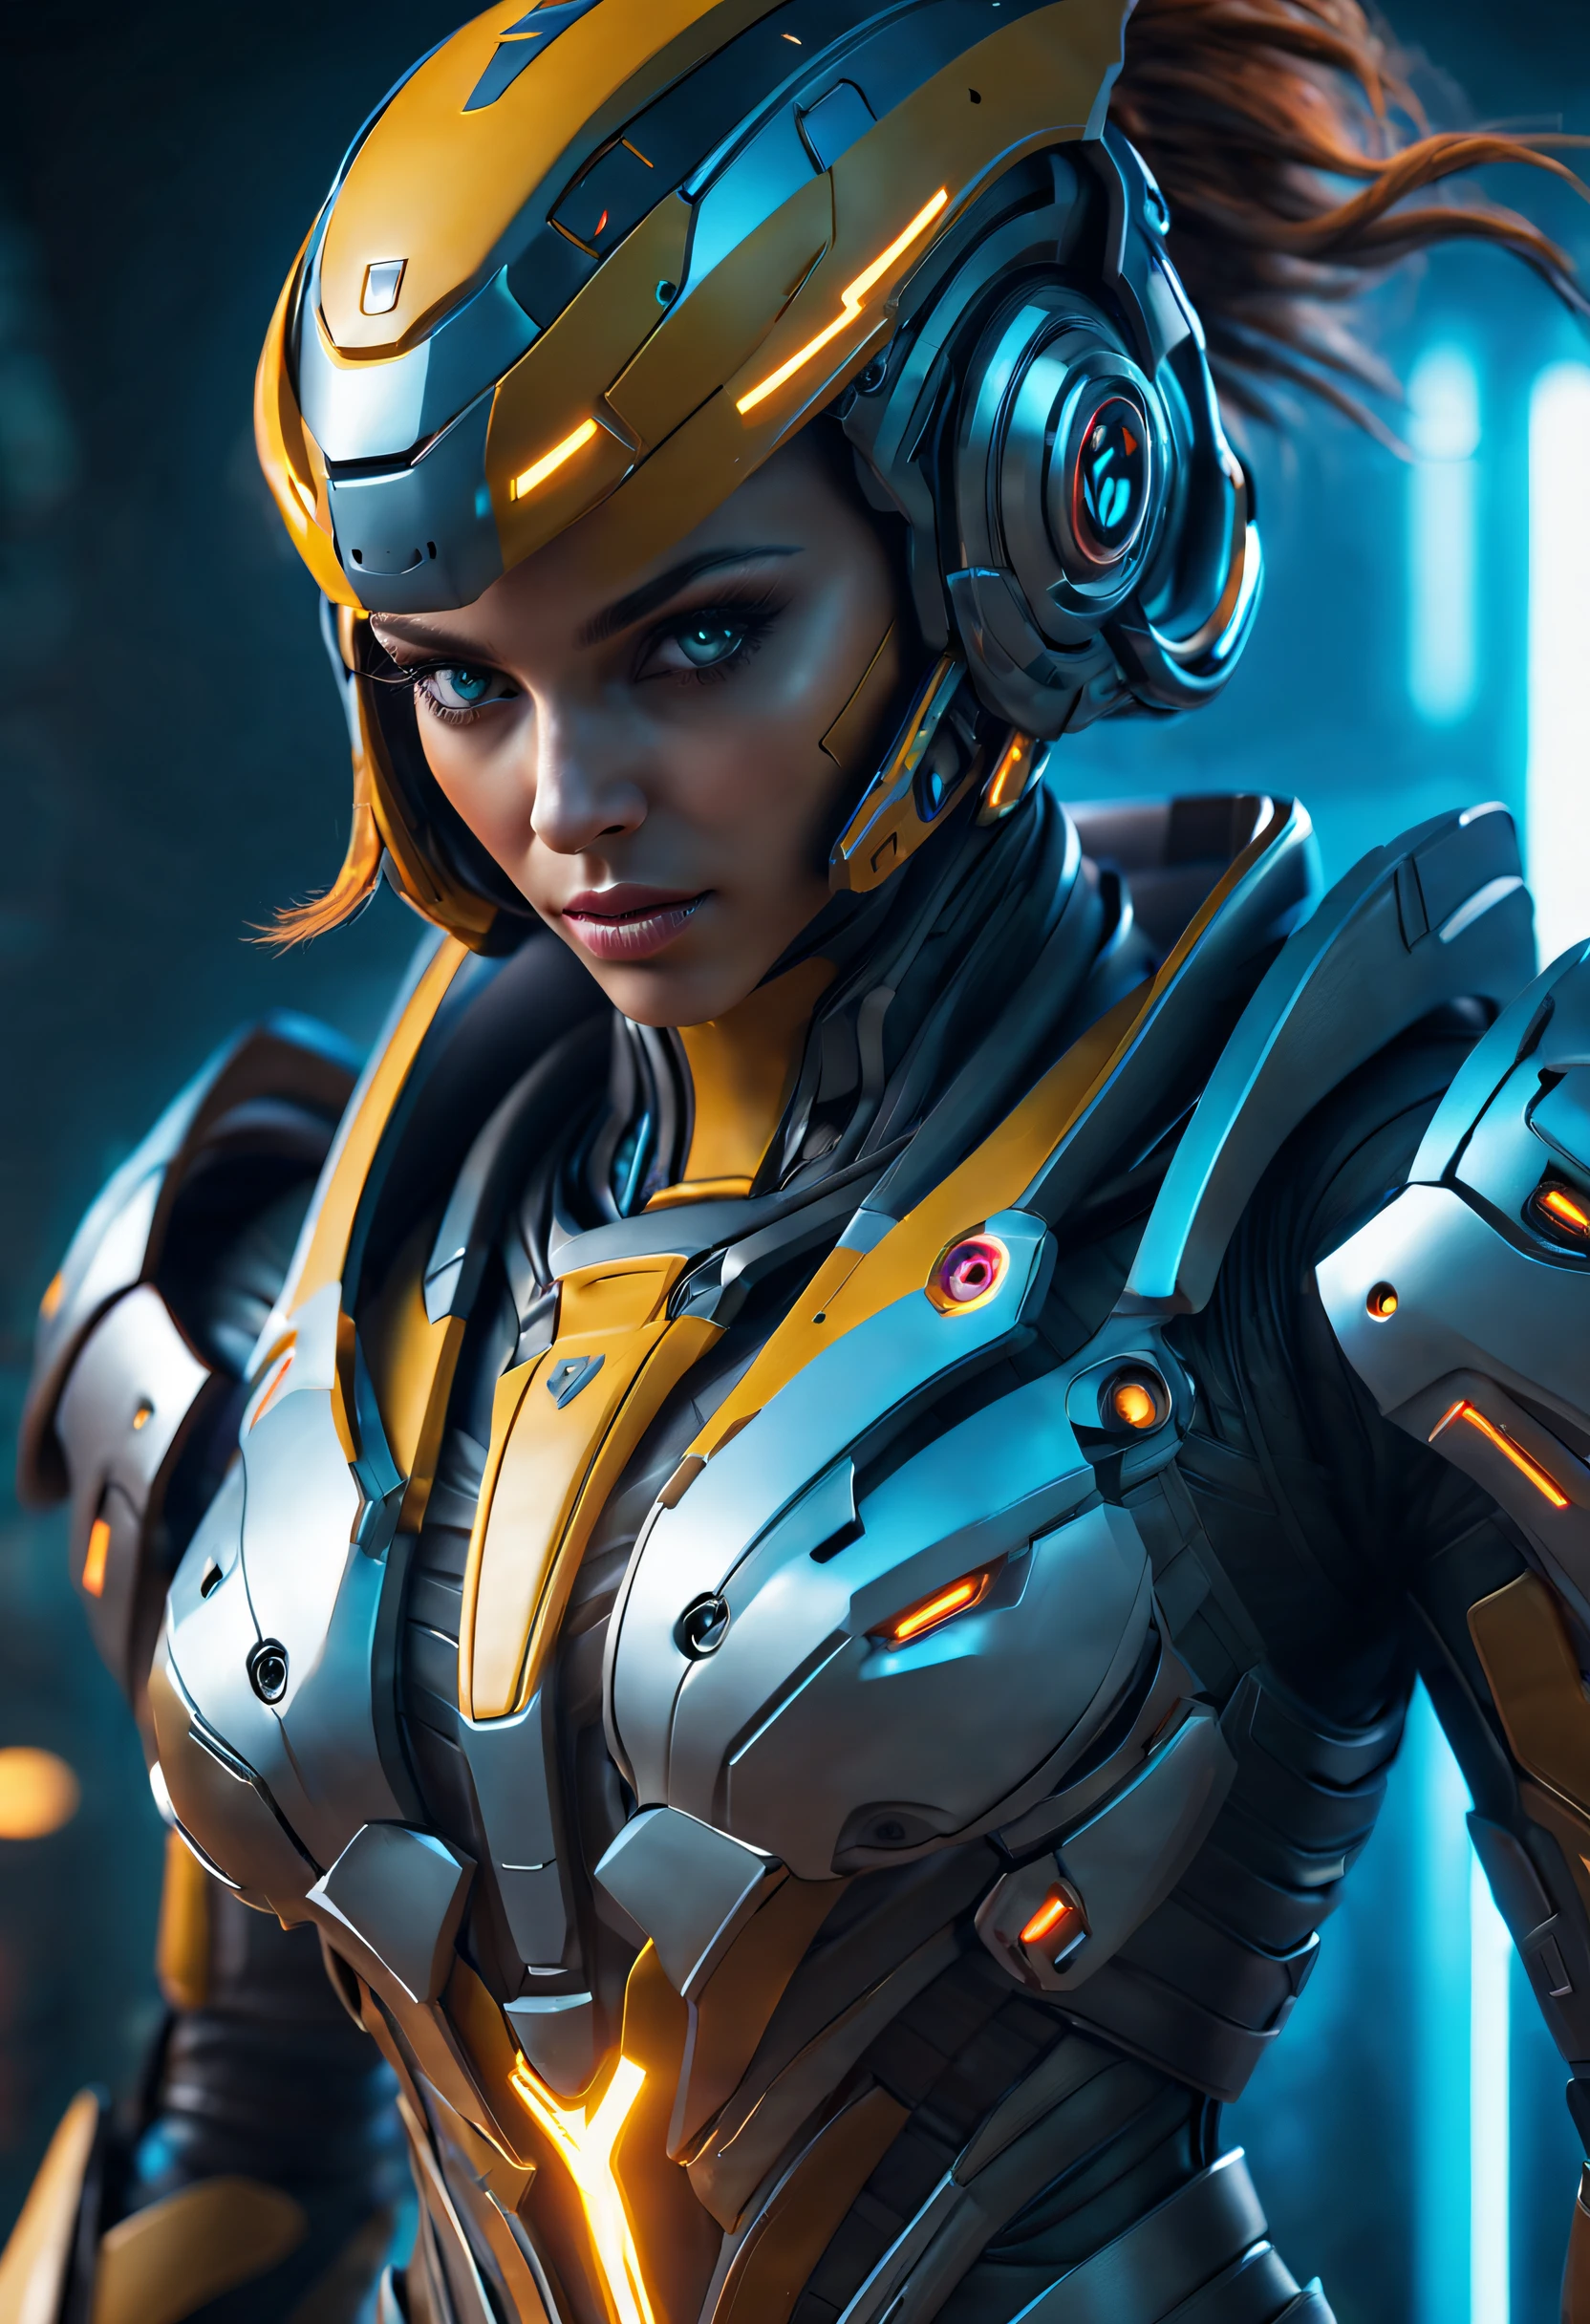 bright lighting, vivid colors, metallic textures, detailed armors, intense gaze, powerful poses, futuristic setting, high-tech weapons, energetic movements, intense battle scenes, dynamic compositions, sci-fi atmosphere. 

(best quality, highres, ultra-detailed), (photorealistic, realistic:1.37), (HDR, UHD), (studio lighting), (physically-based rendering), (extreme detail description), (professional), (portraits, sci-fi), (colorful palette), (bright lighting), (futuristic ambiance).